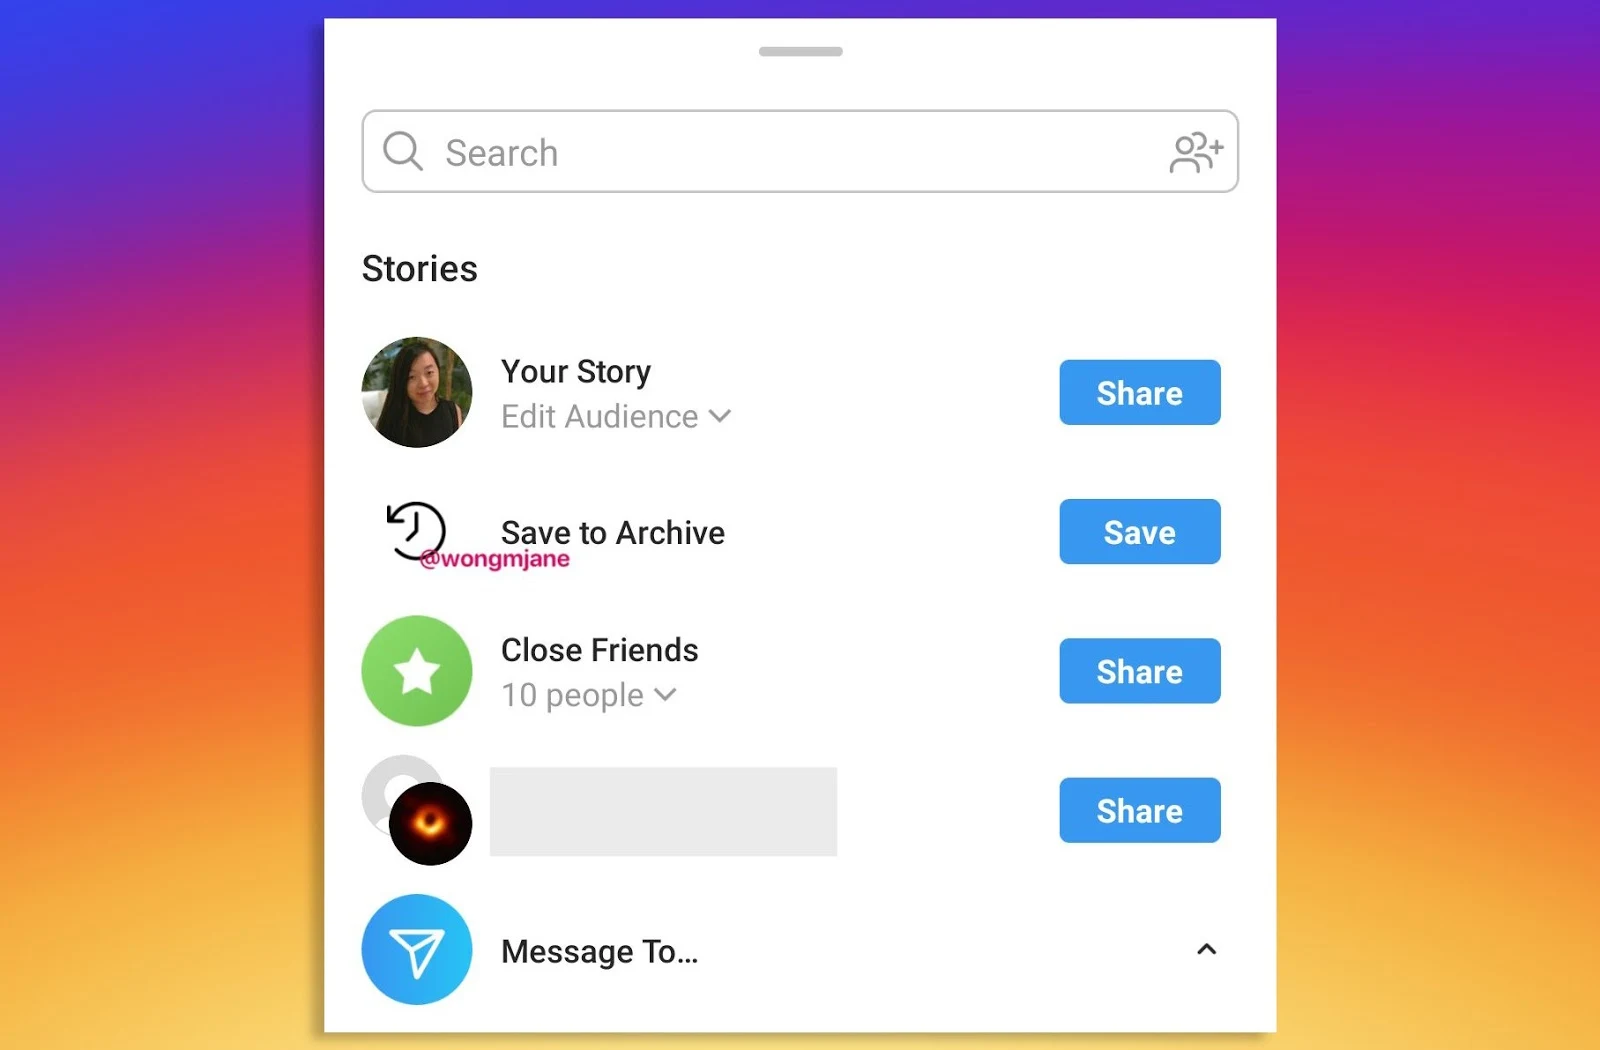 Instagram is testing the ability to save new Stories to Archive directly